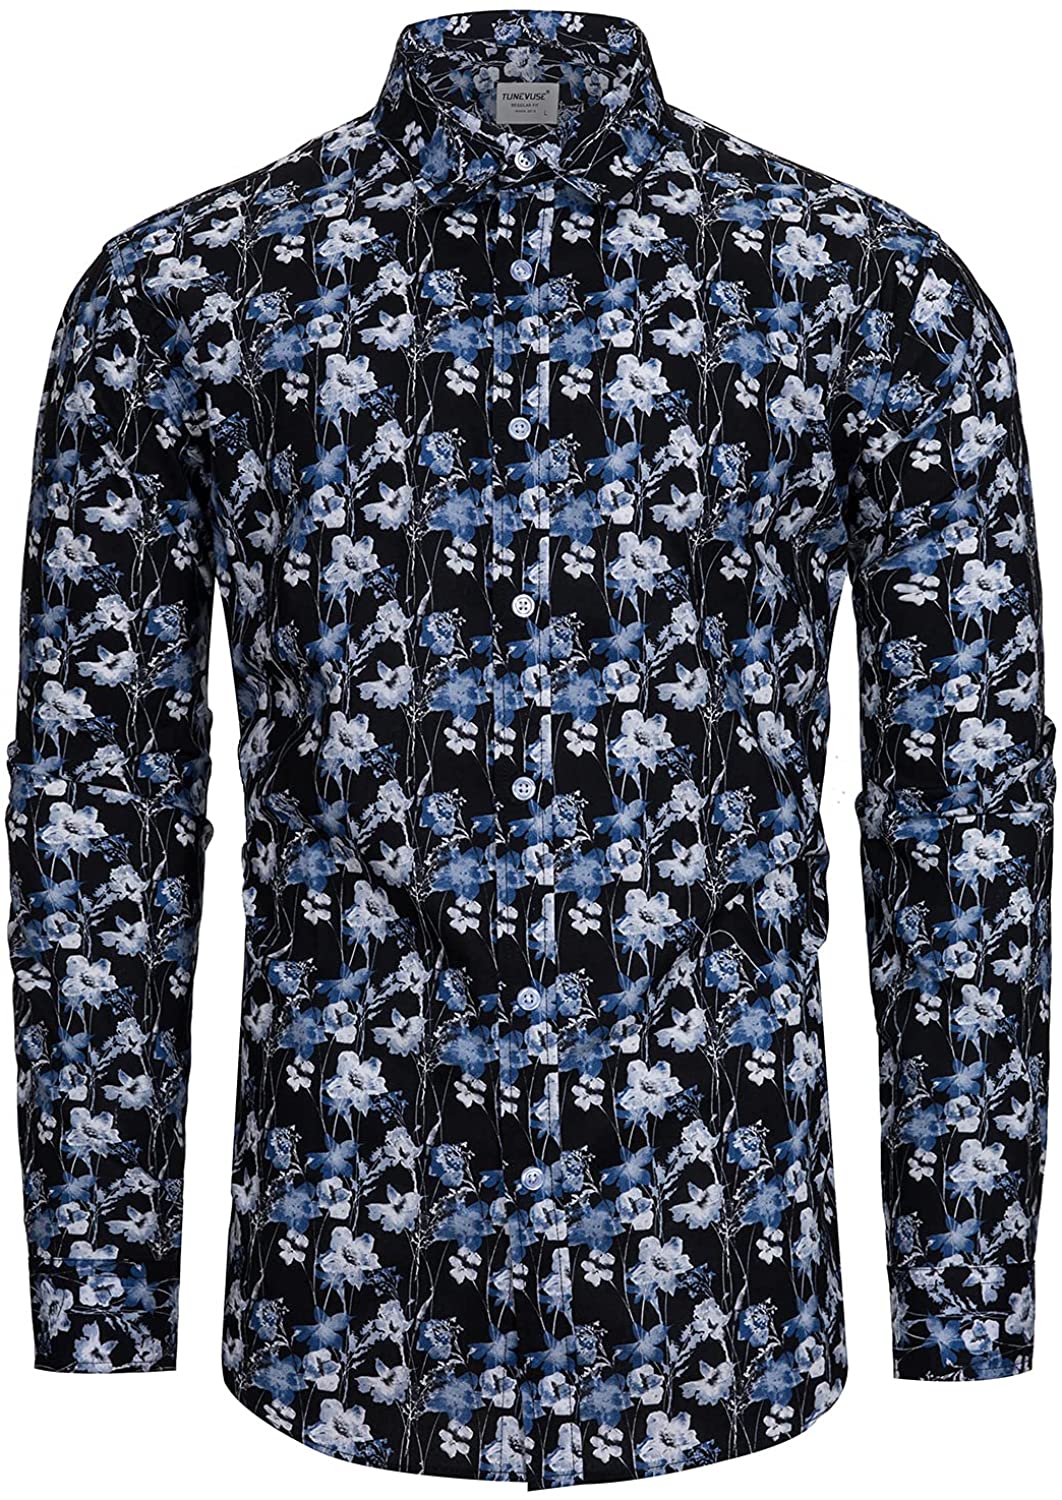  TUNEVUSE Mens Floral Print Dress Shirt Flower Pattern Long  Sleeve Button Down Shirts Medium : Clothing, Shoes & Jewelry